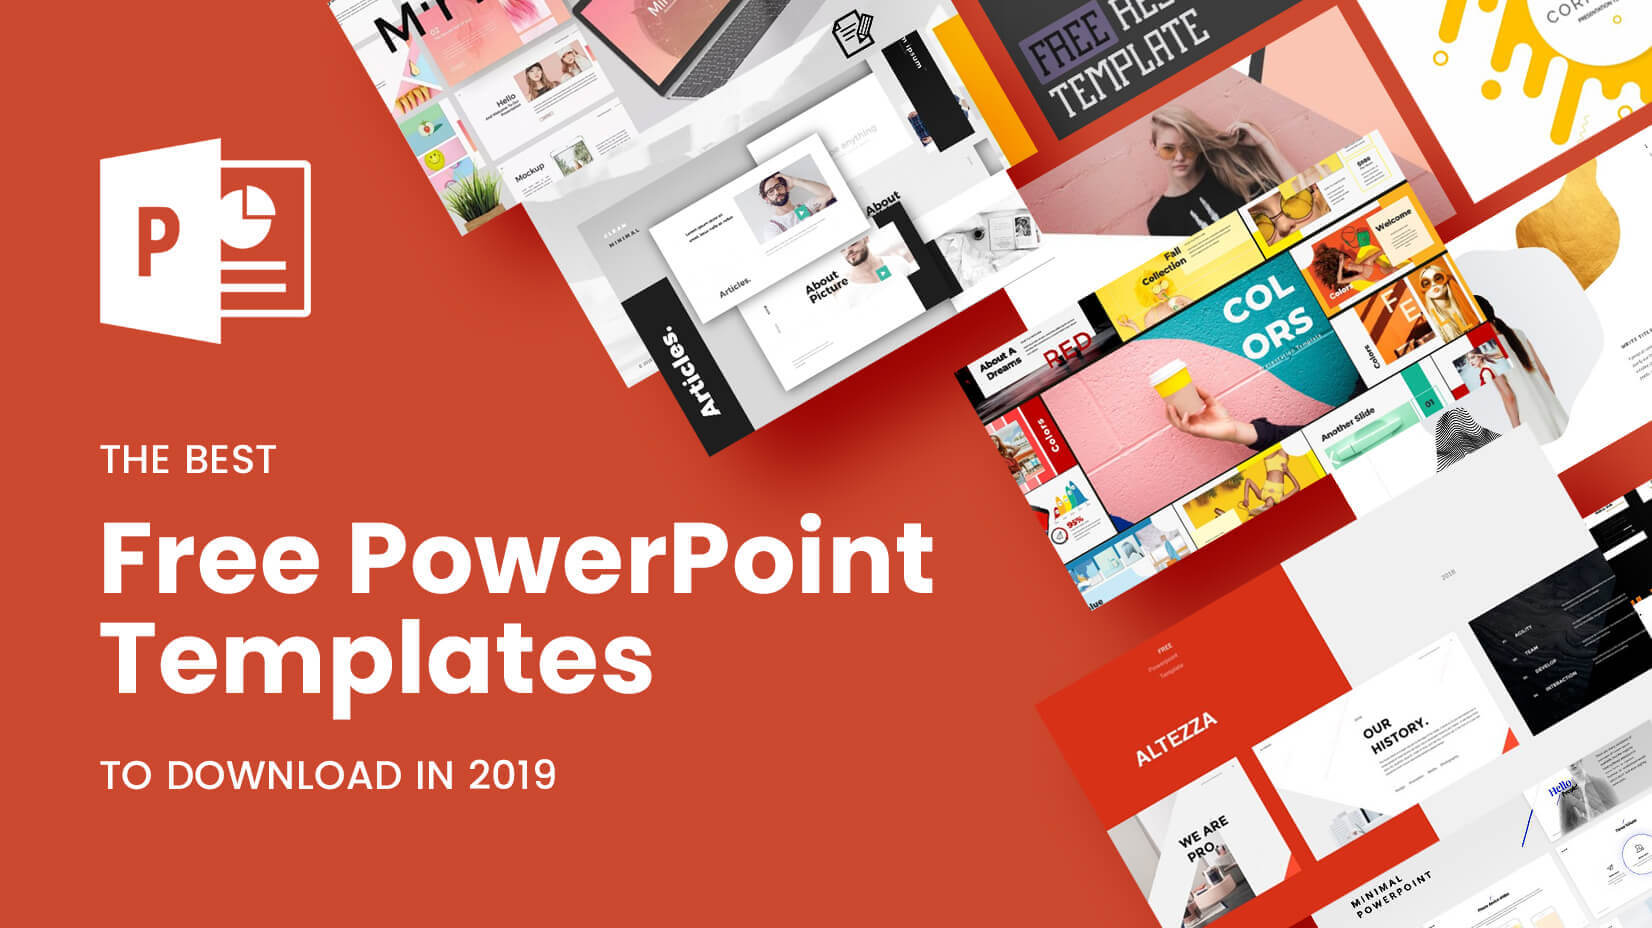 The Best Free Powerpoint Templates To Download In 2019 For Powerpoint Slides Design Templates For Free